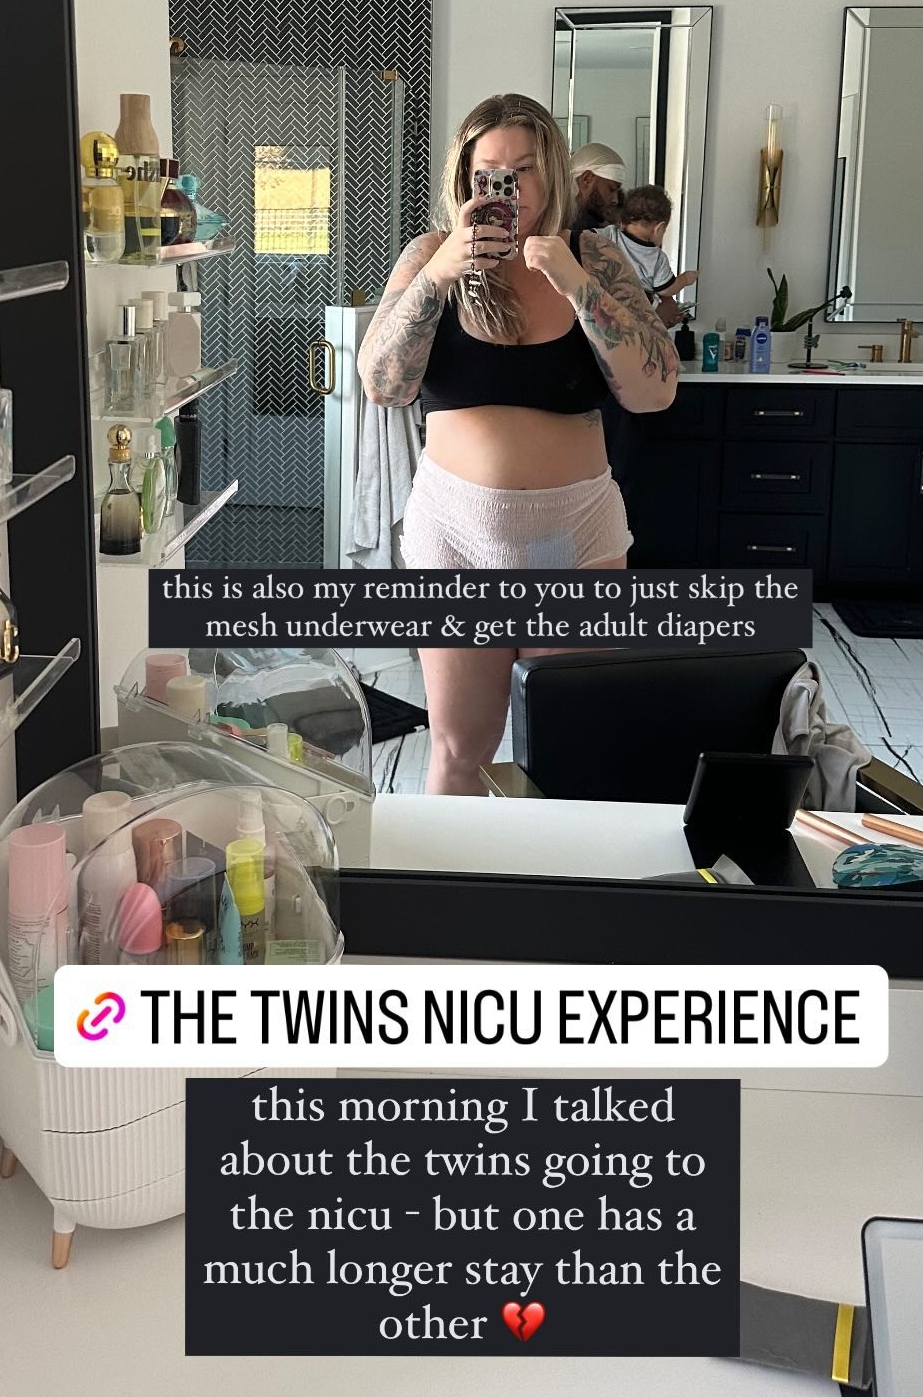 Kailyn encouraged mother-to-be's to 'skip the mesh underwear & get the adult diapers'